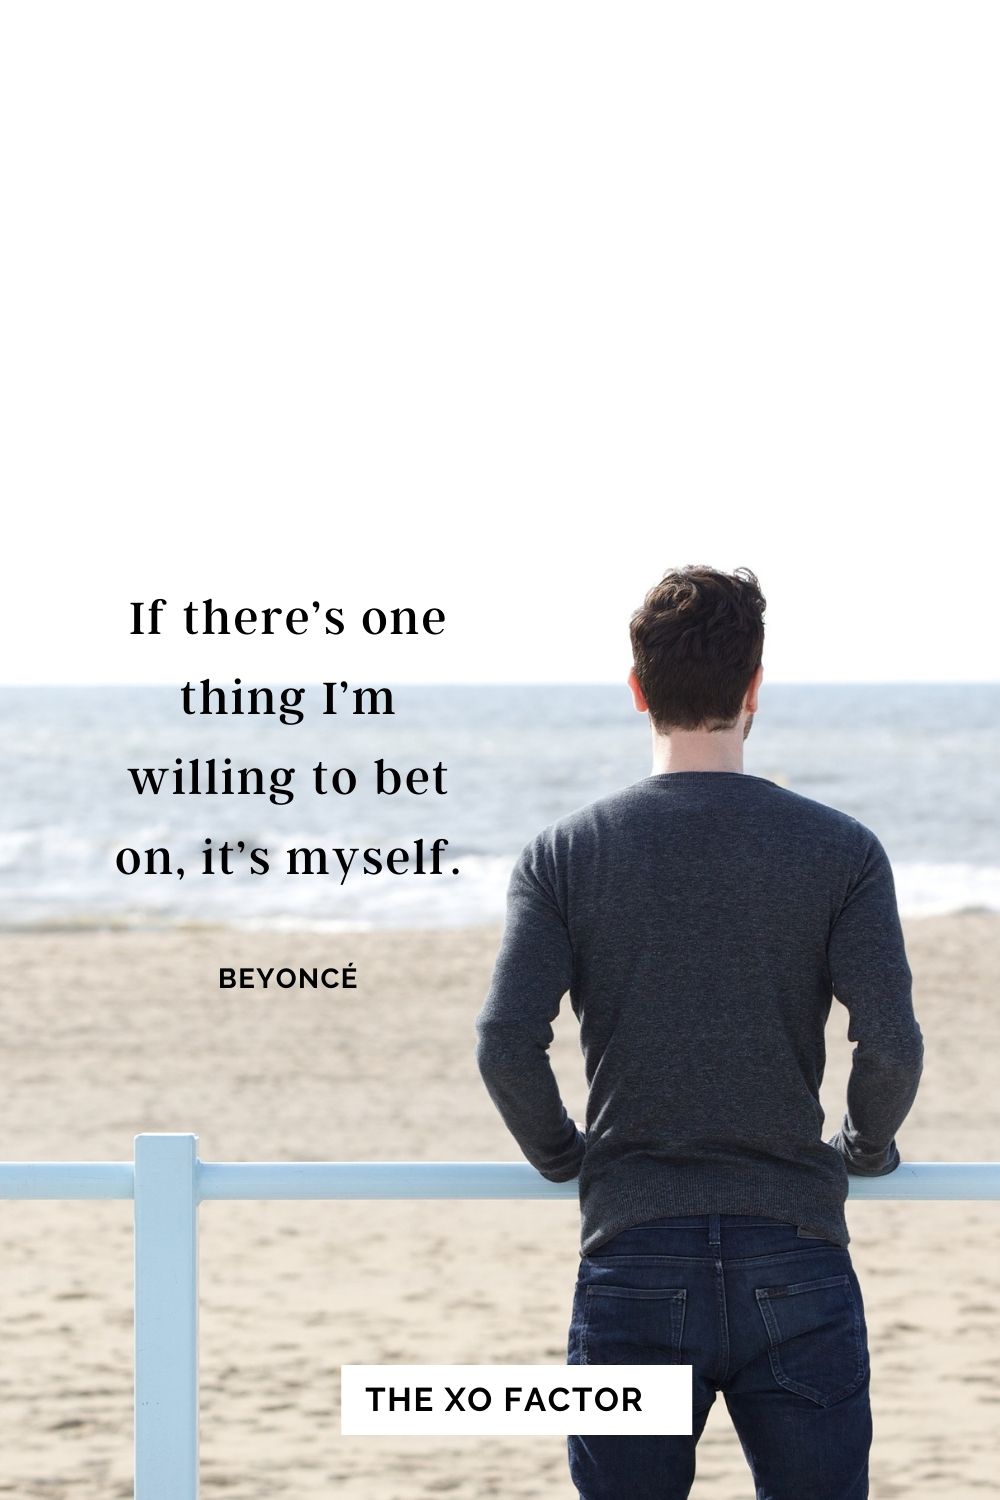 If there’s one thing I’m willing to bet on, it’s myself. Beyoncé